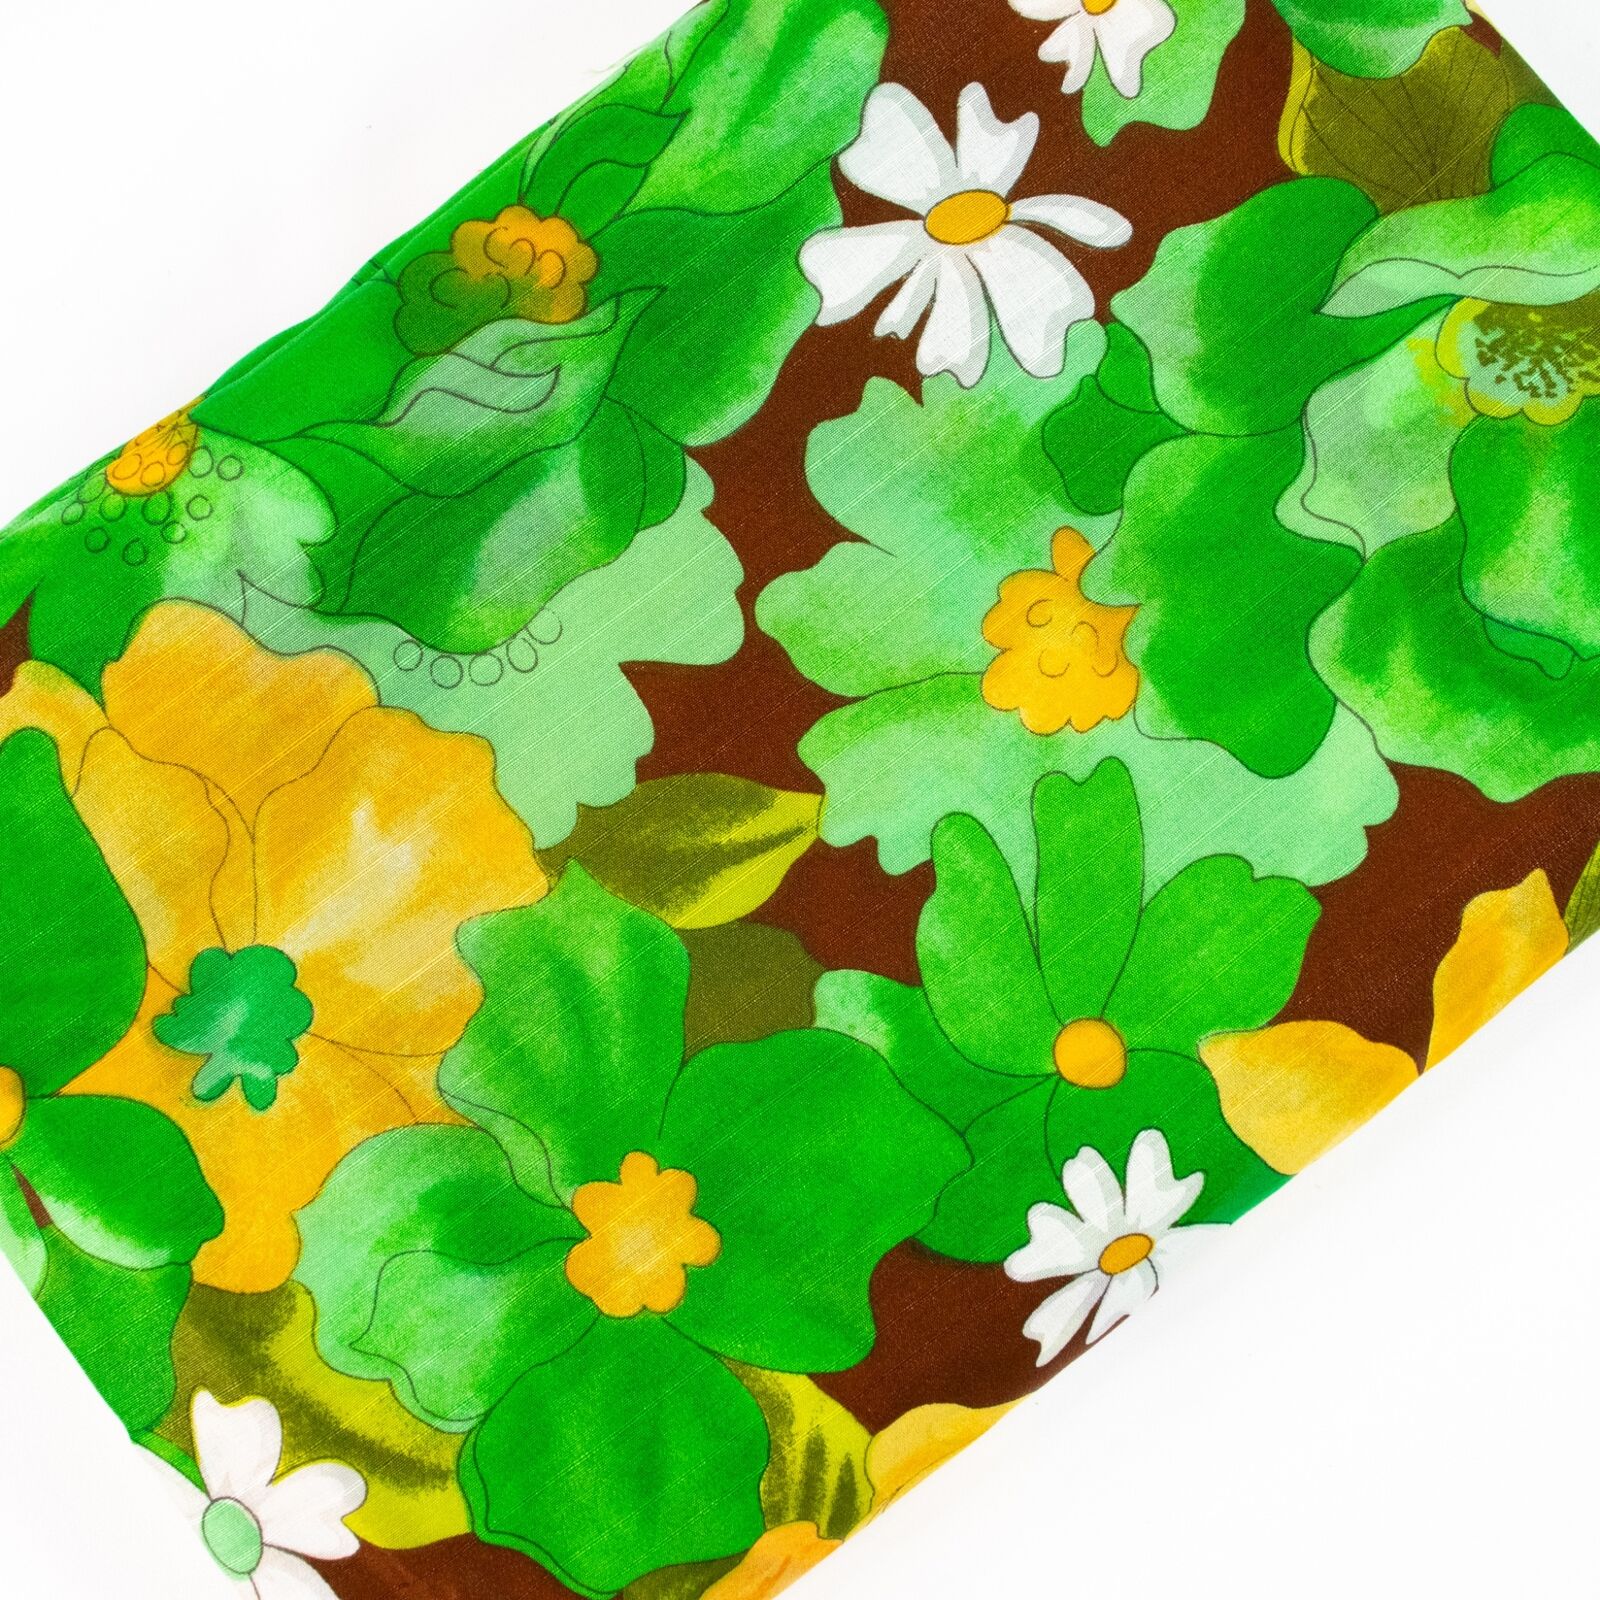 Vintage Fabric Flower Power Hippy Floral Green Brown Yellow 1960s 1970s 45x116